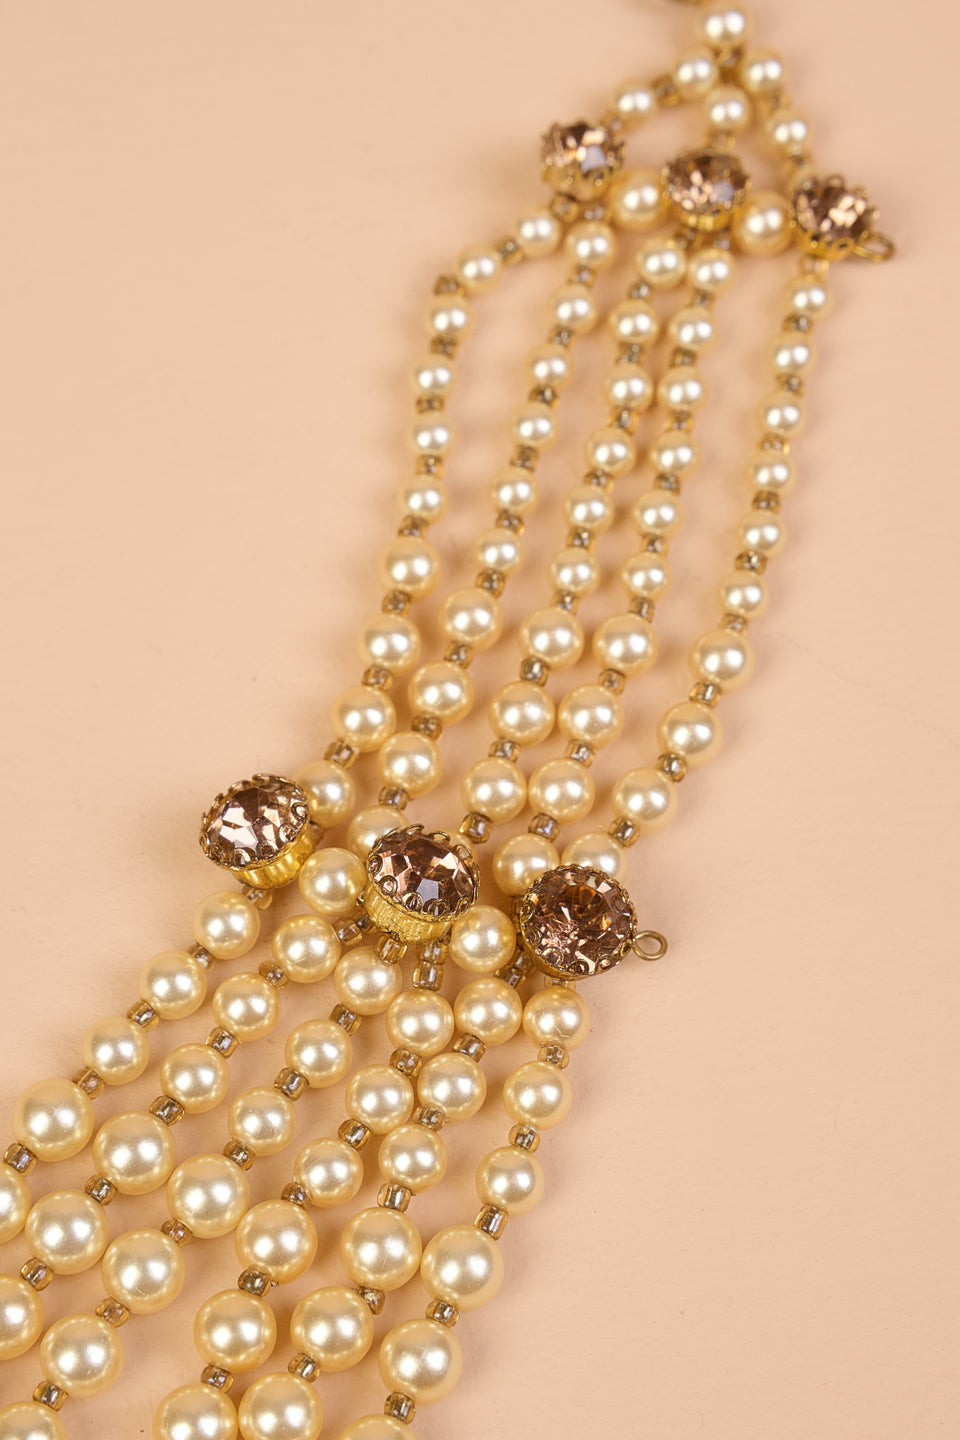 6 Layered Gold Beads Mala With Centre Drop Crystal